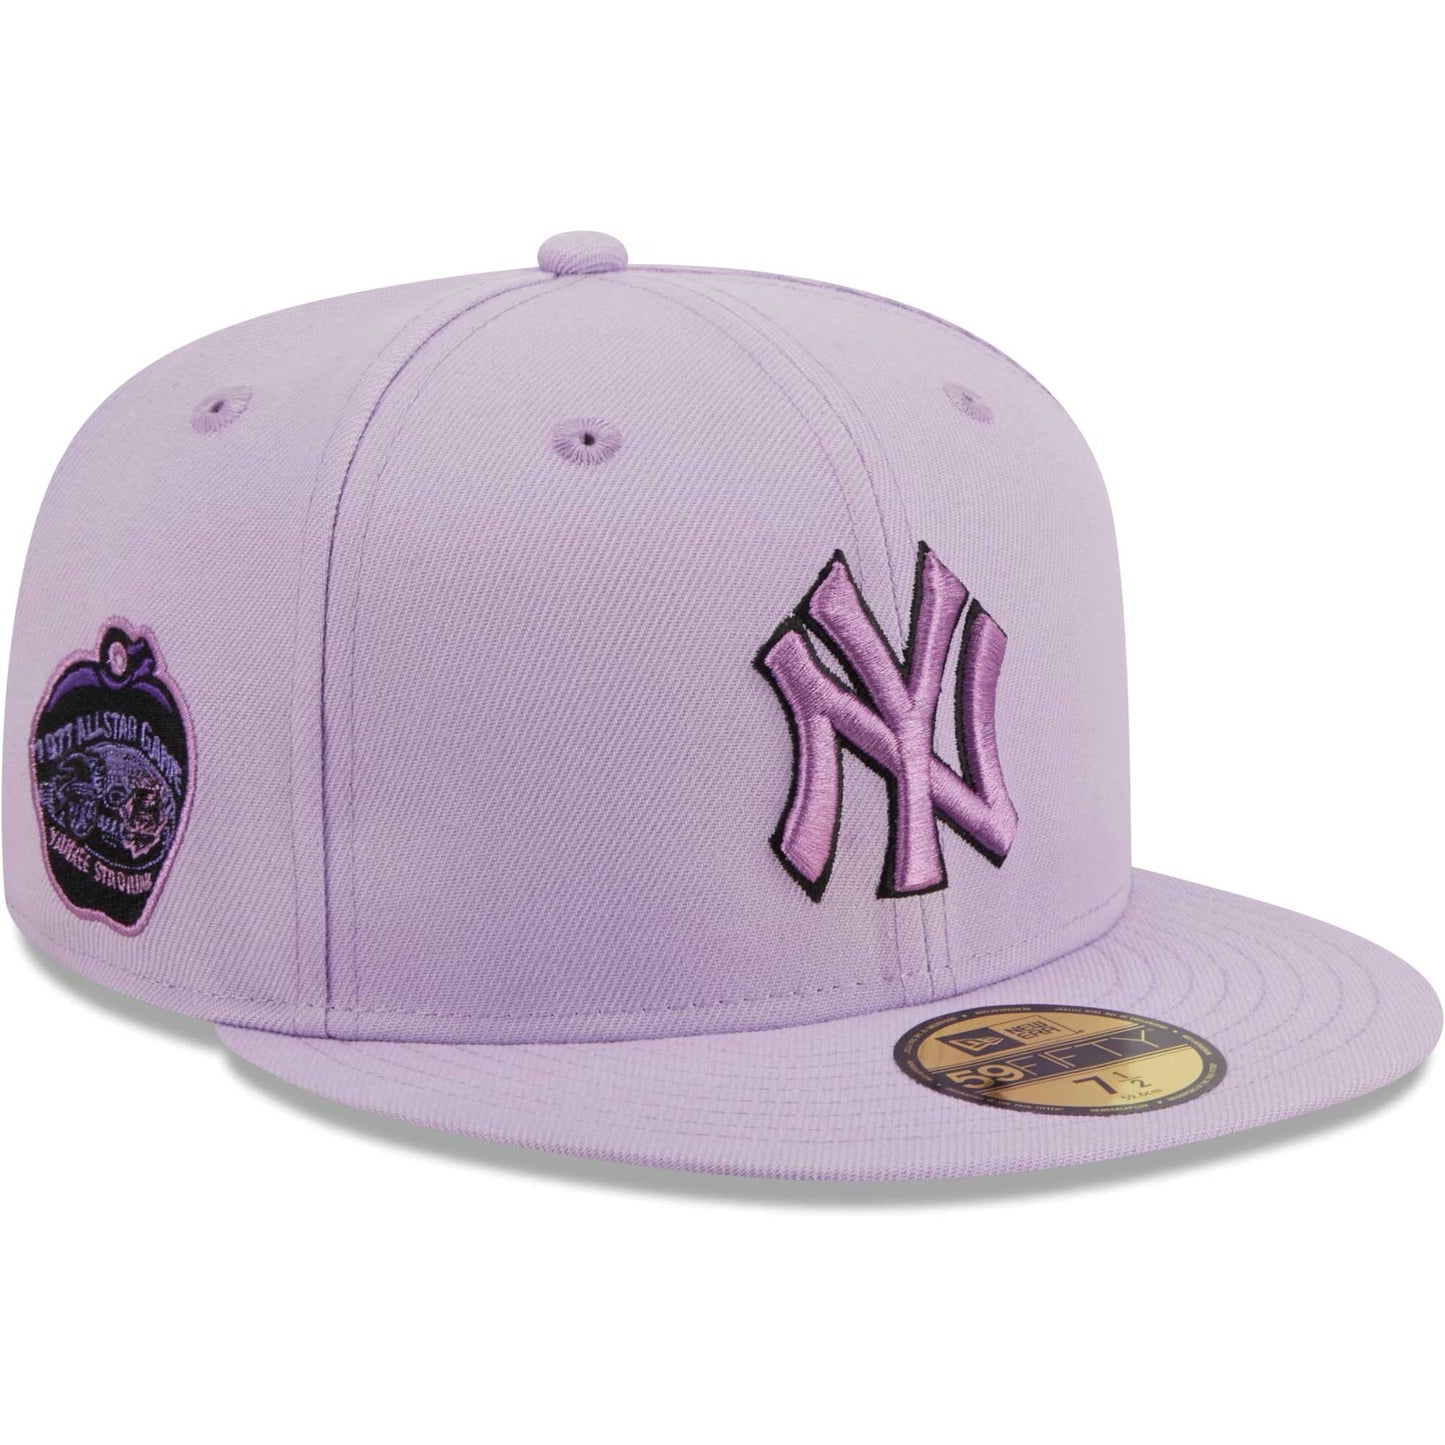 New York Yankees New Era 59FIFTY Fitted Hat - Lavender